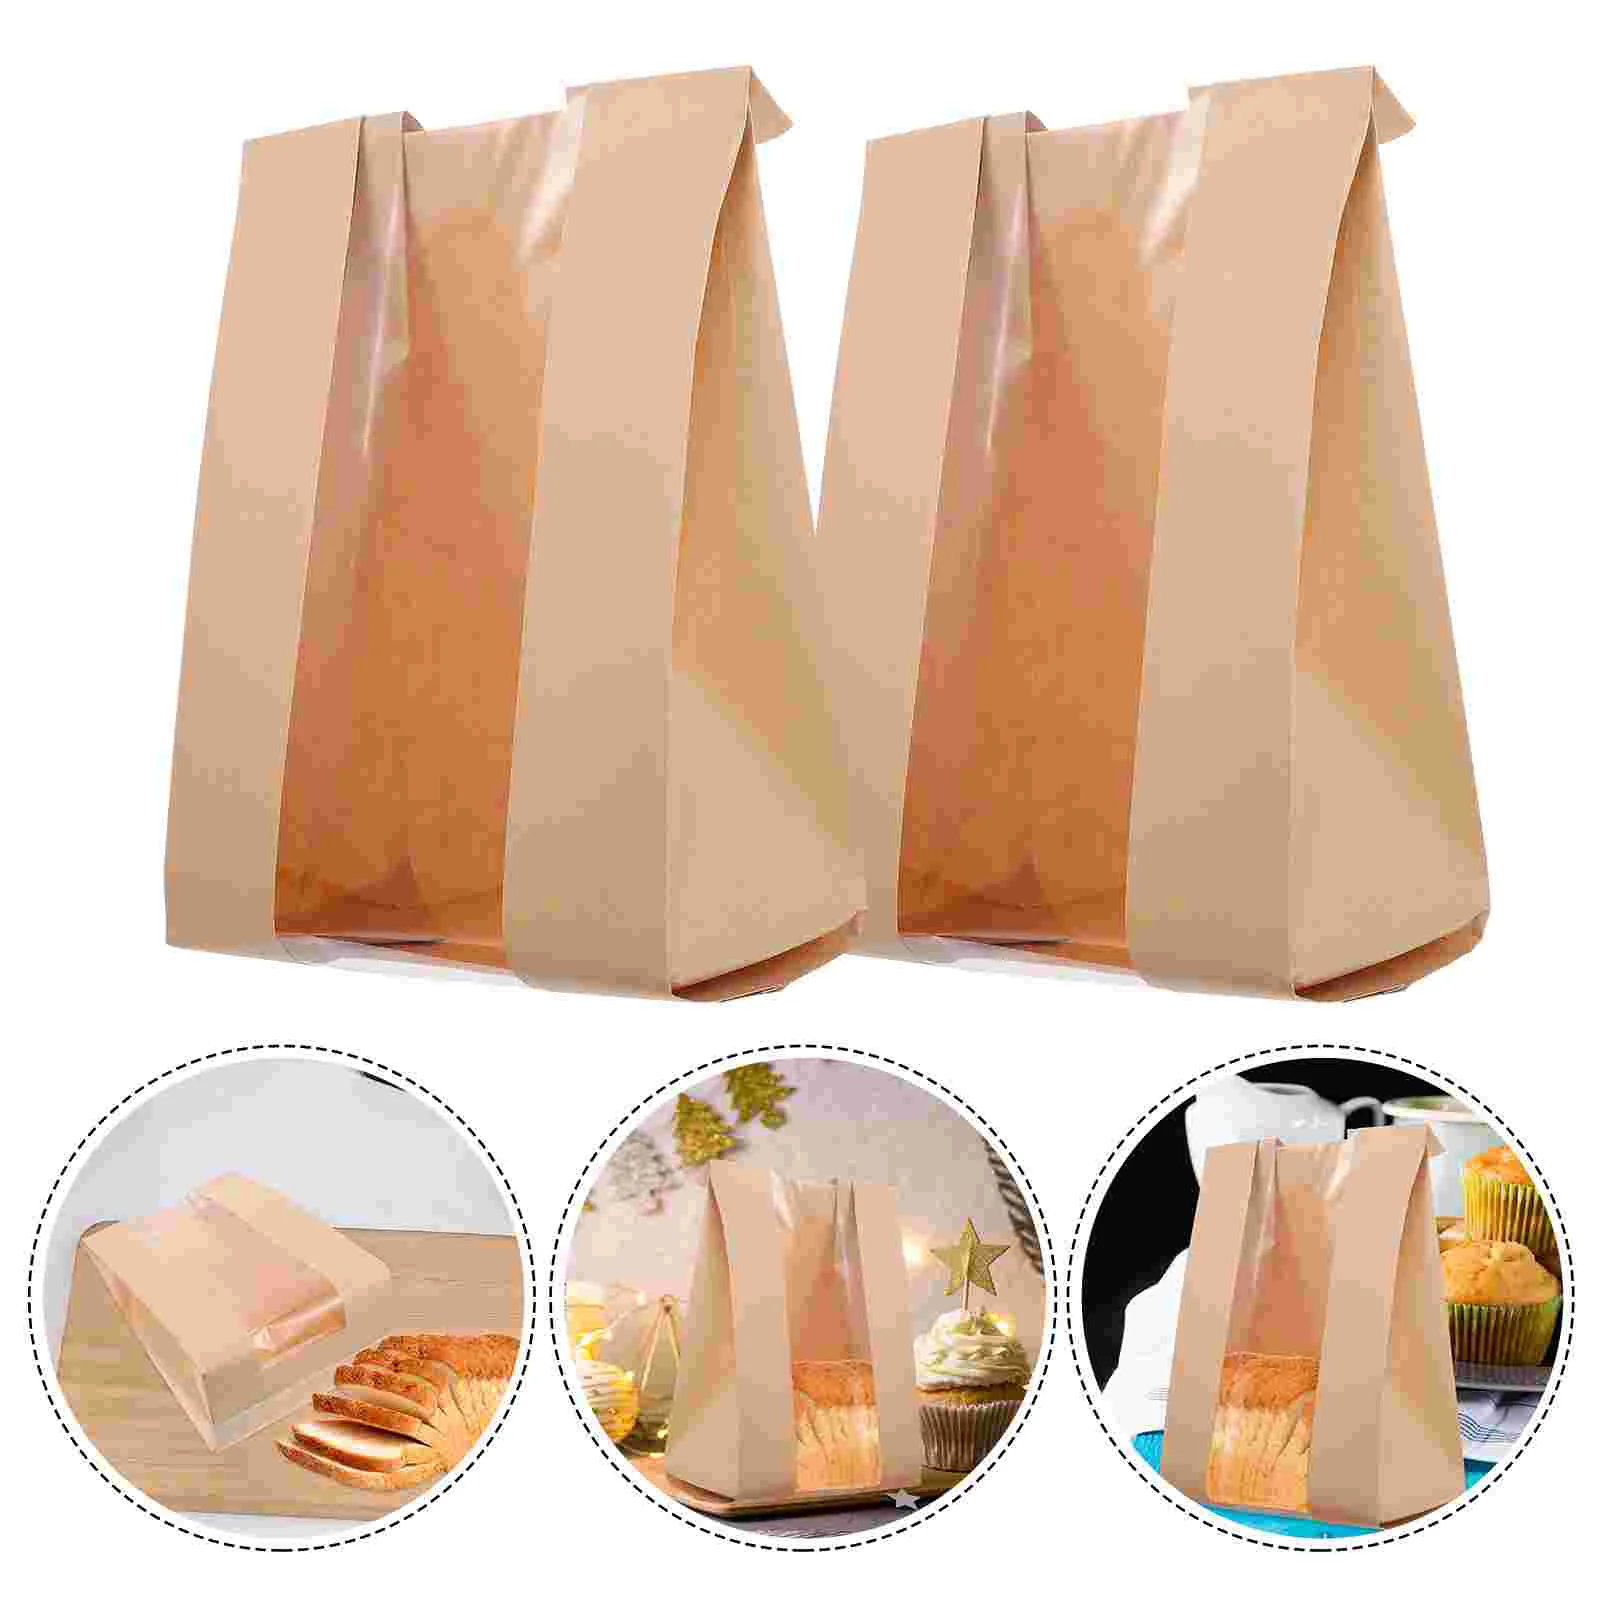 

50 Pcs Toast Bread Bag Brown Gift Cookie Bags Baked Candy Packing Packaging Takeout Kraft Paper